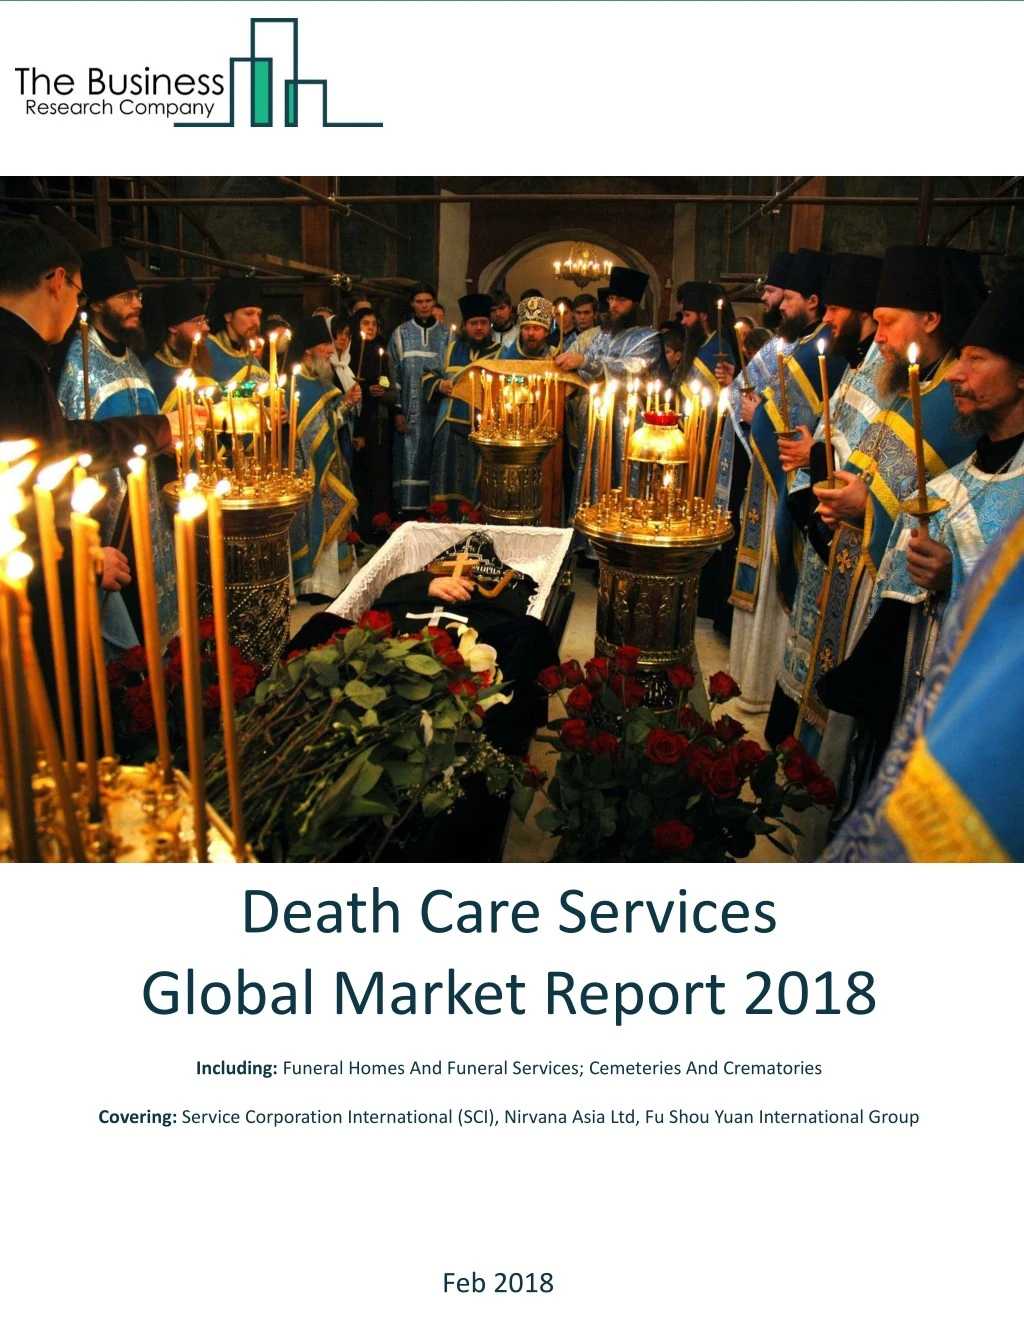 death care services global market report 2018